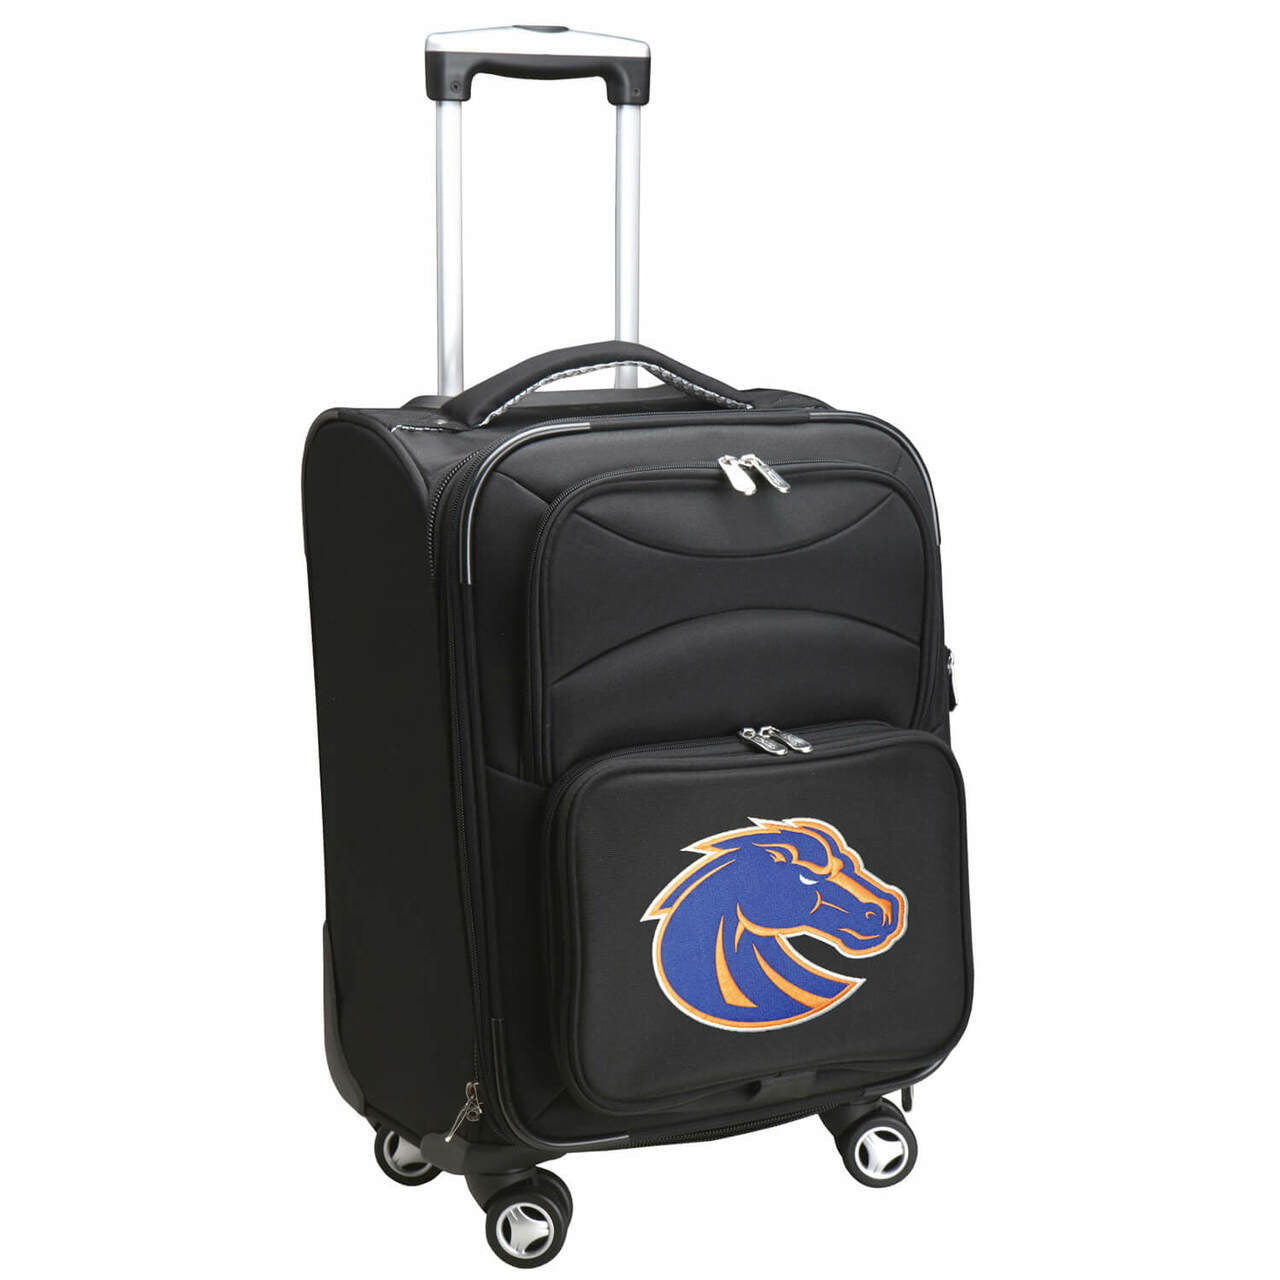 Boise State Broncos 20" Carry-on Spinner Luggage